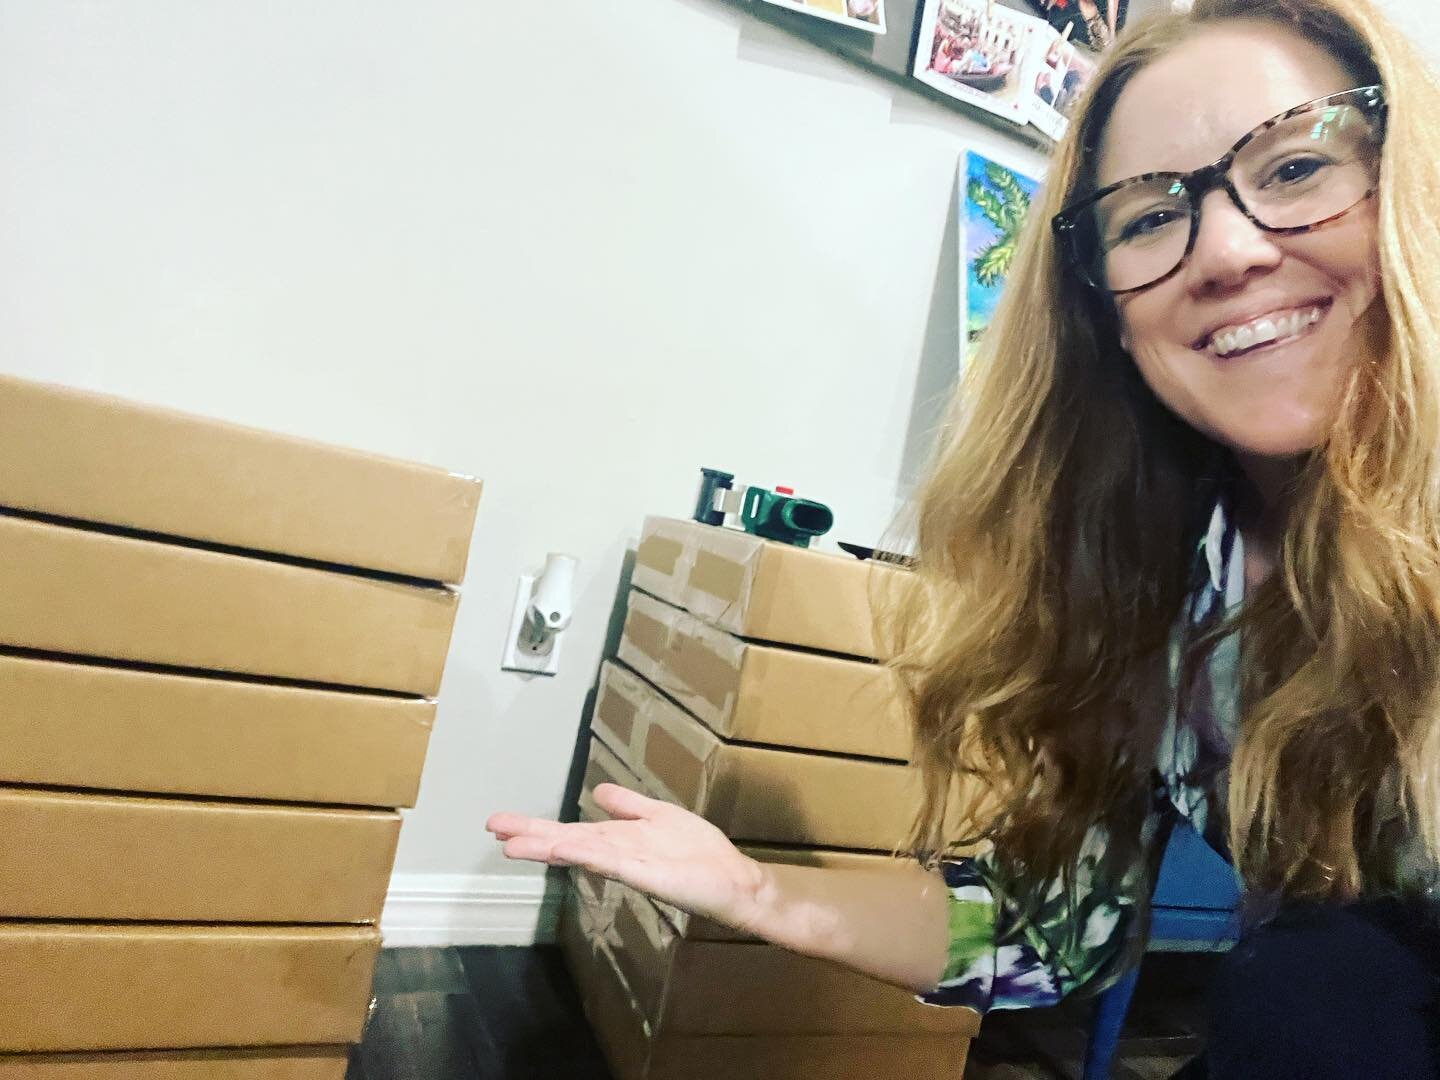 These new College Planning in a Box kits are ready to ship out! With the new Parent Guide, College Fit Priority Card Sort, Parent Worksheets, Student Workbook, and Mindmap posters they are a one stop shop! We created it for families, tutoring centers